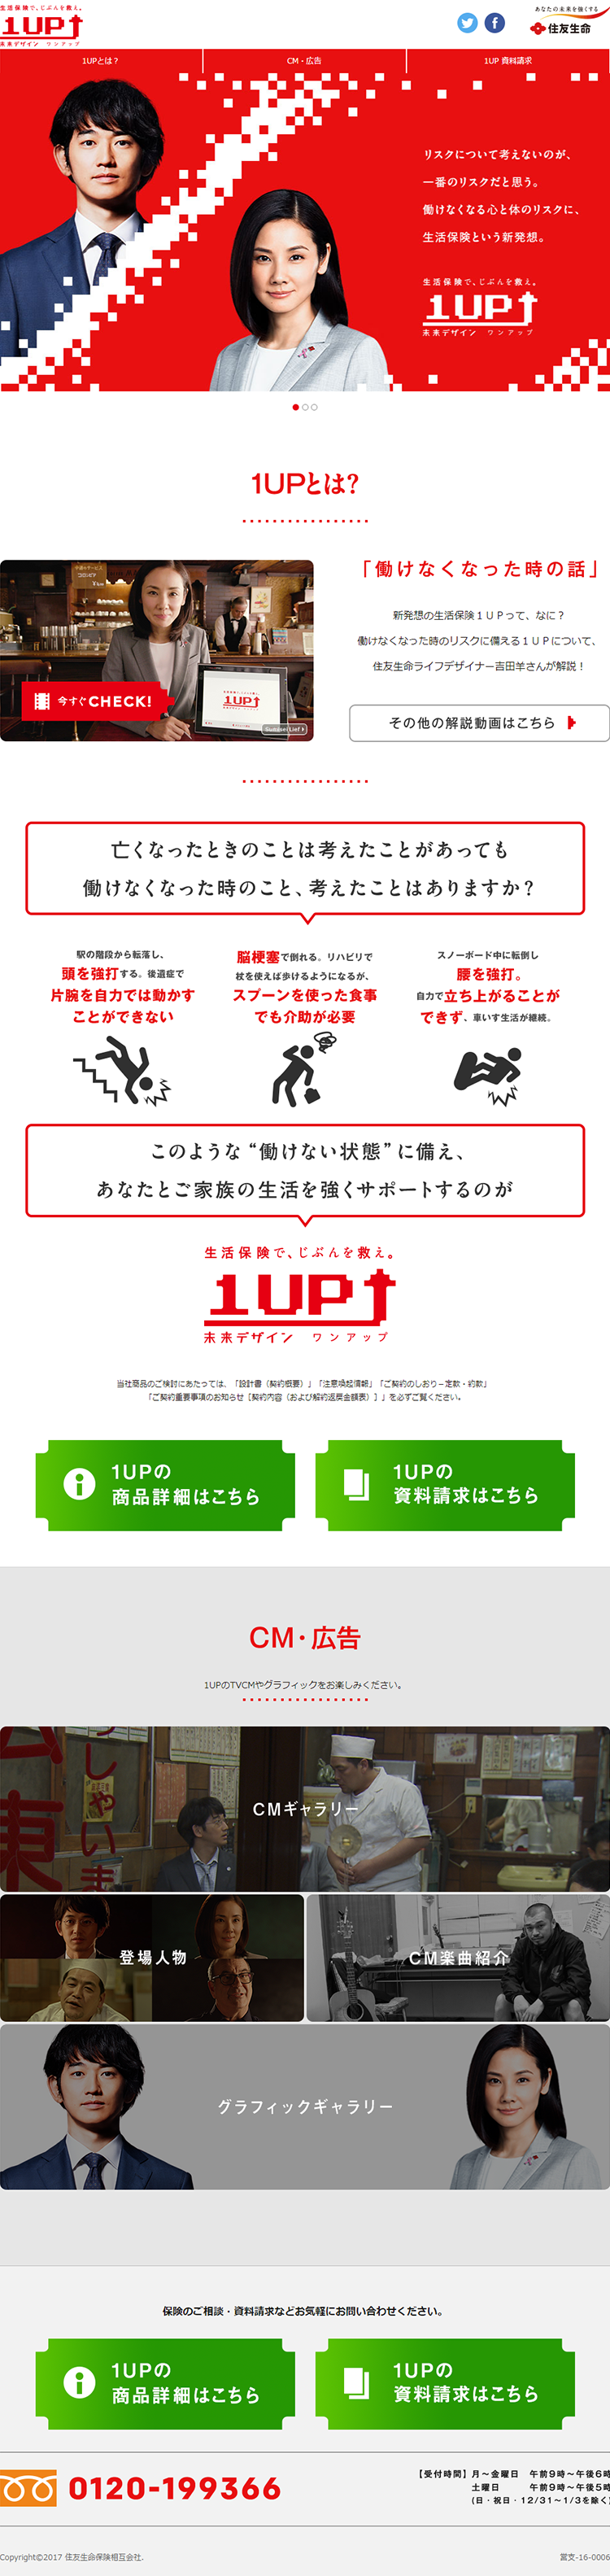 1UP_pc_1